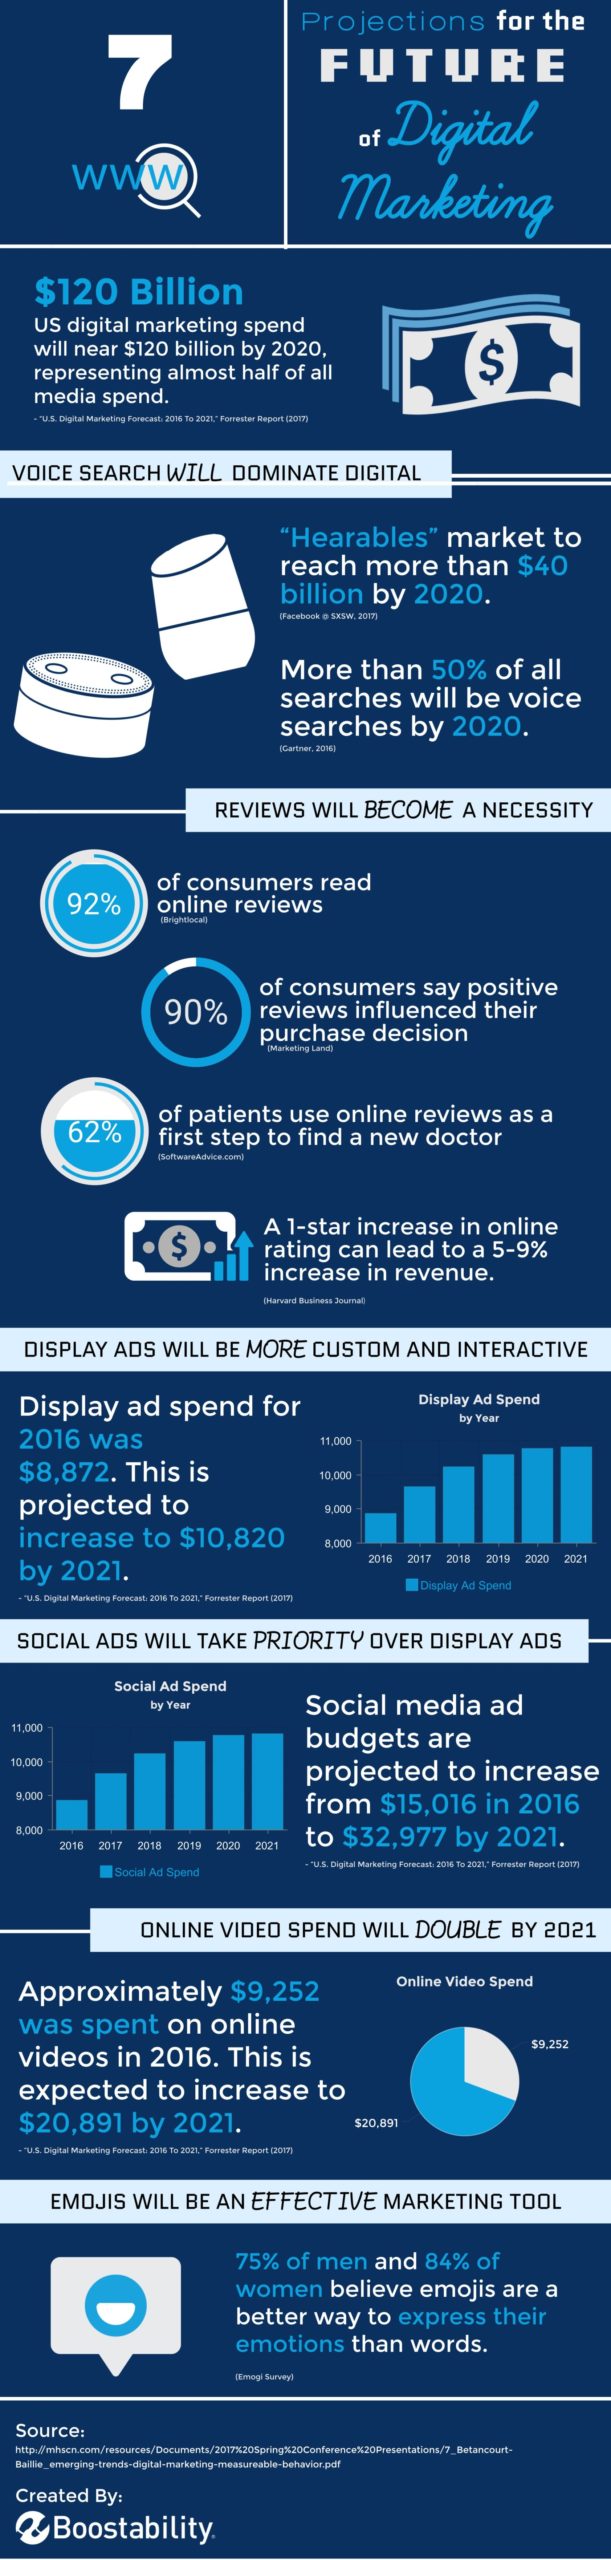 7 Projections for the Future of Digital Marketing [Infographic]